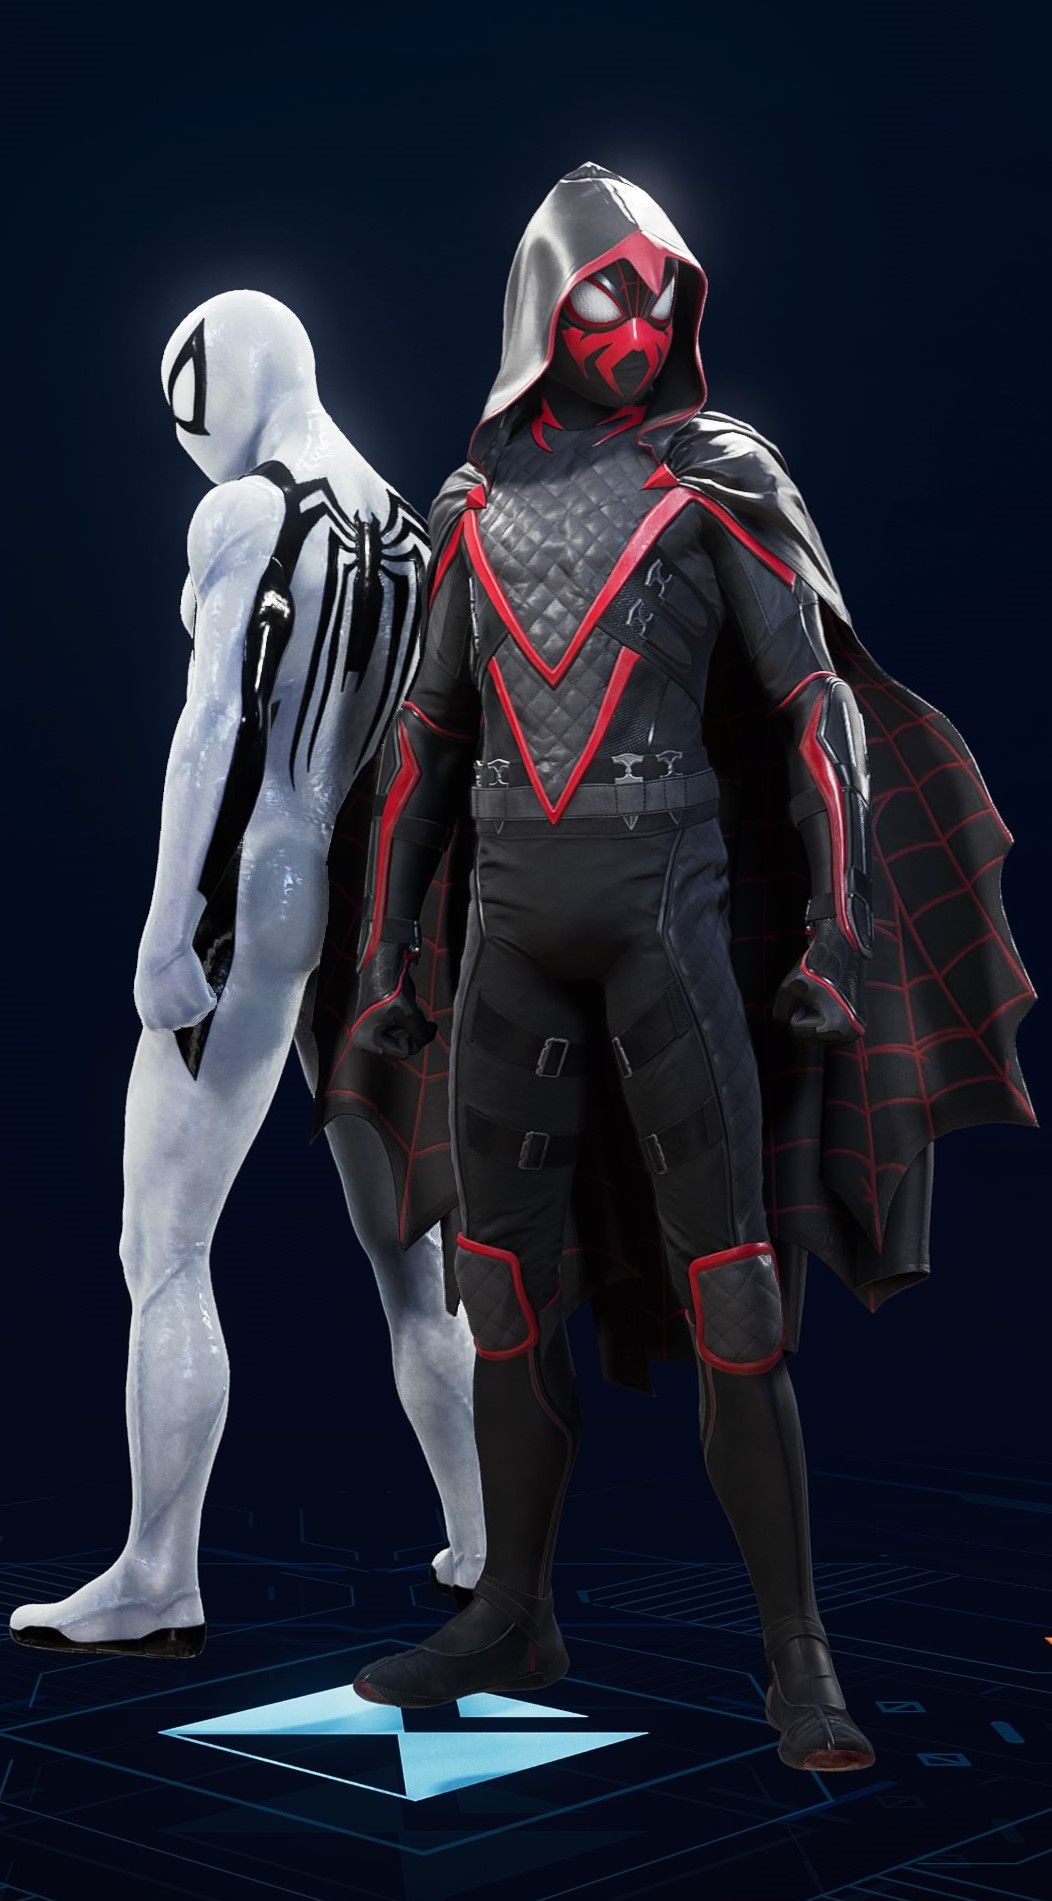 Miles Morales stands in his Shadow-Spider Suit in the suit selection screen of Spider-Man 2.